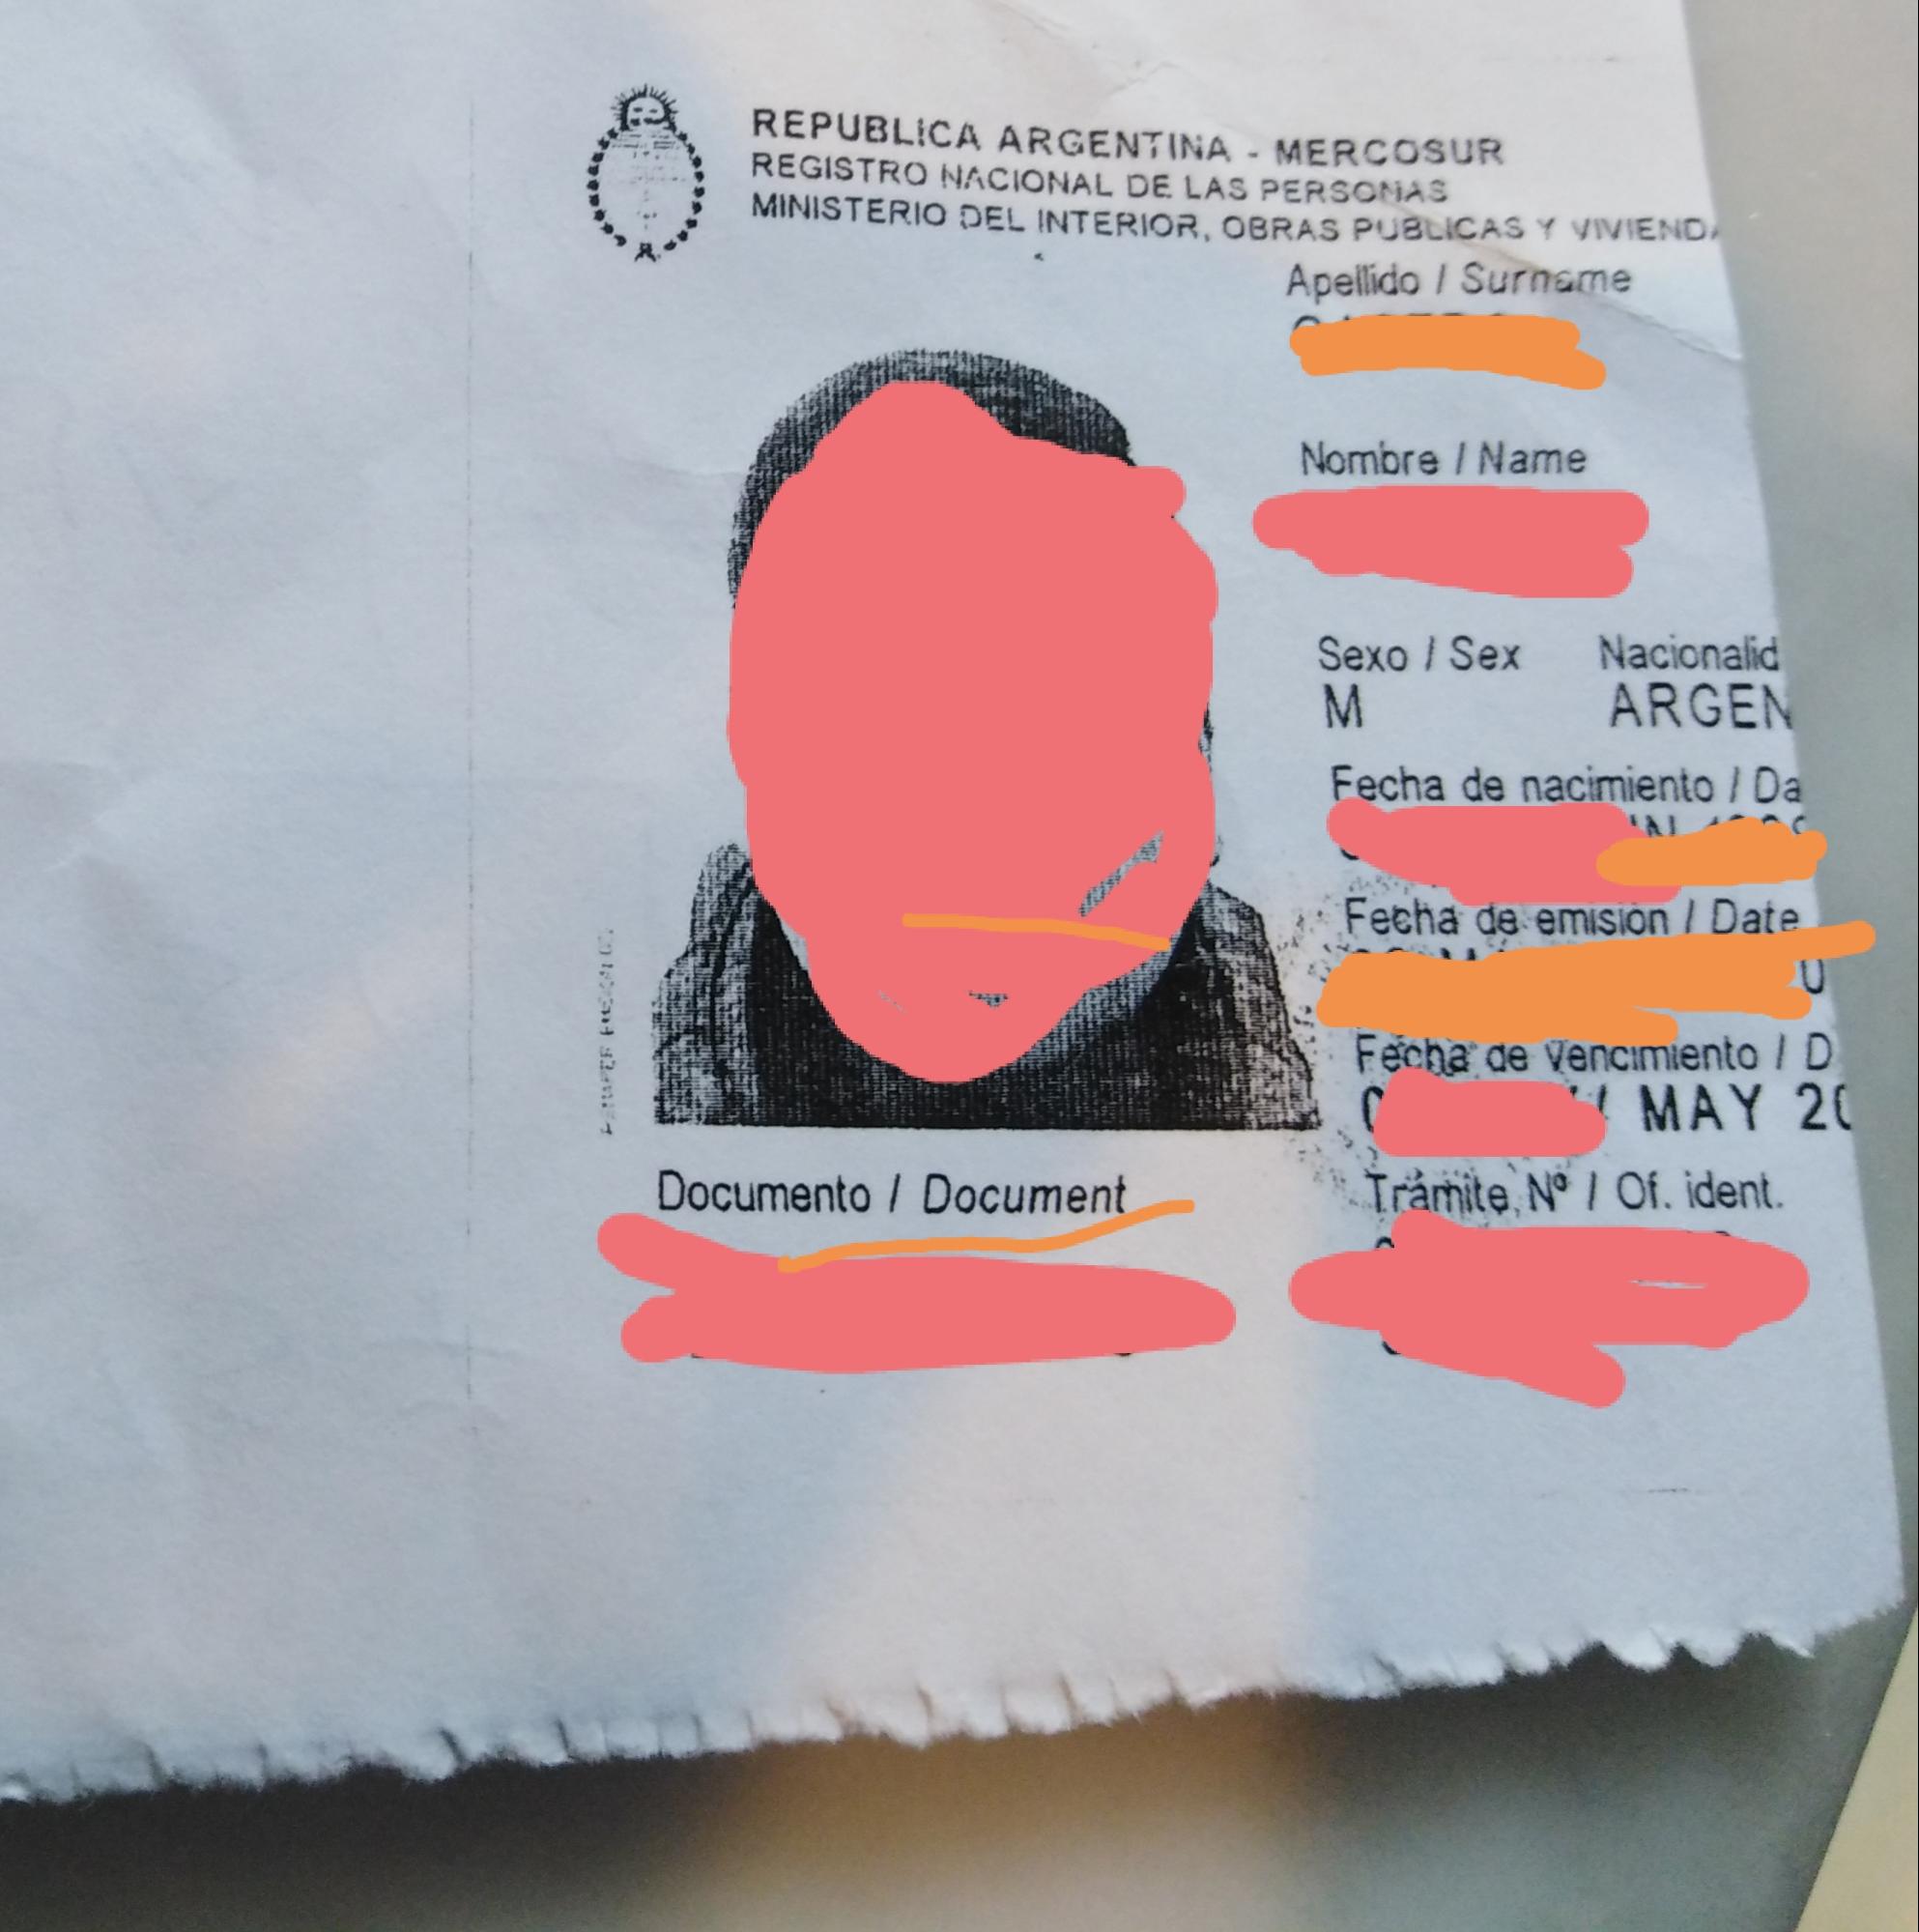 an image of an Argentinian identity card with the key identifying details redacted